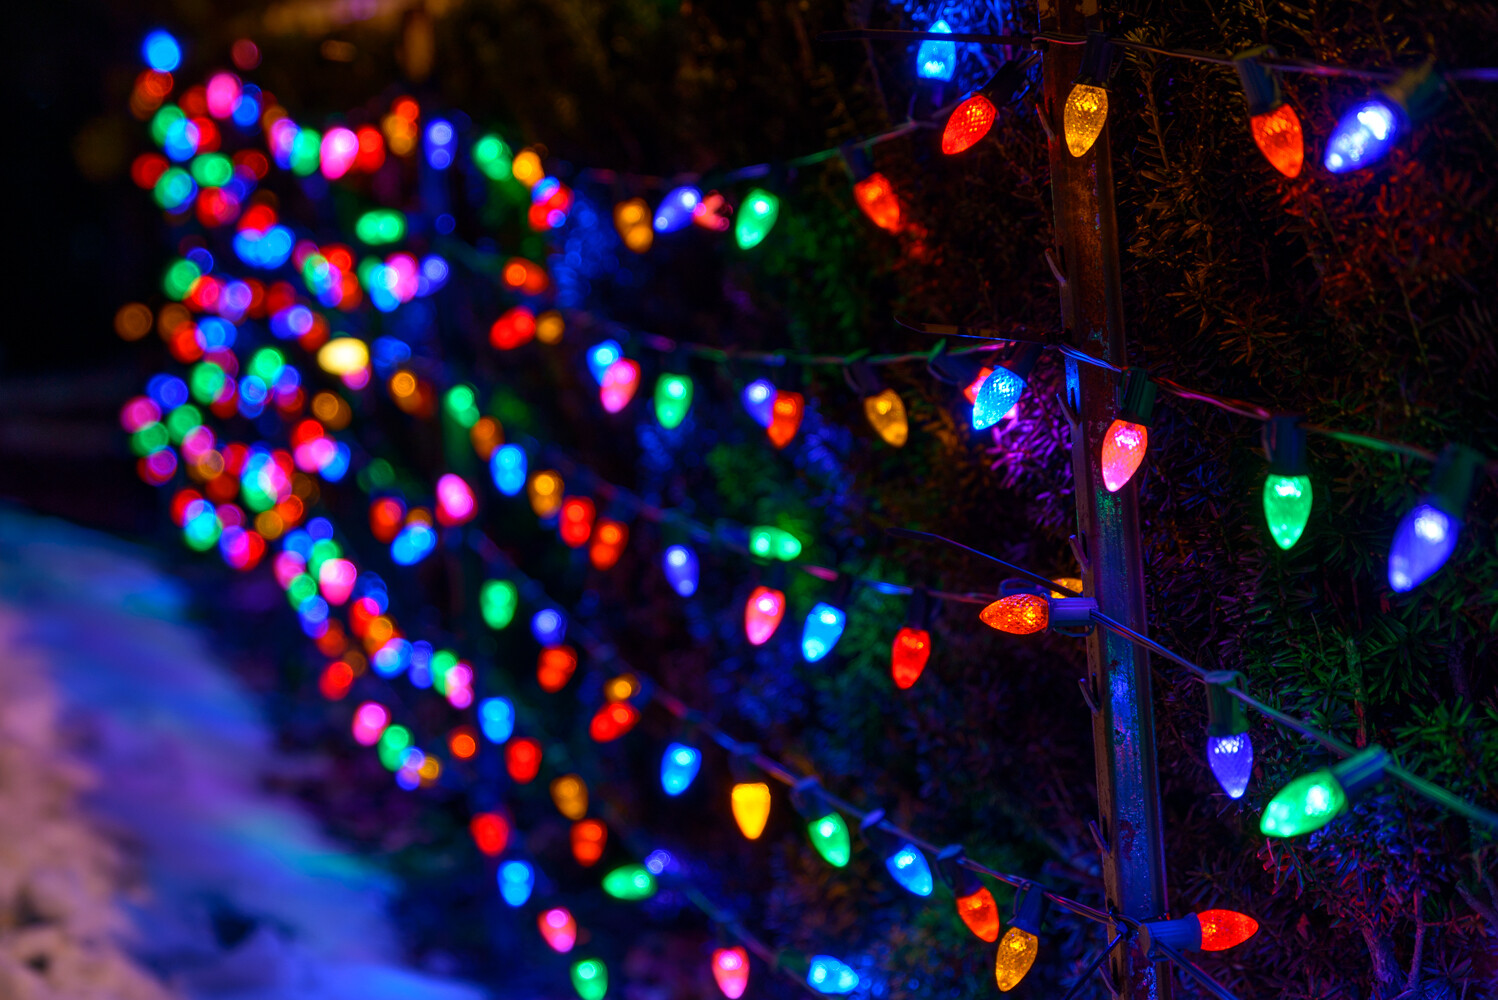 Photographing Holiday Lights in Low Light and at Night